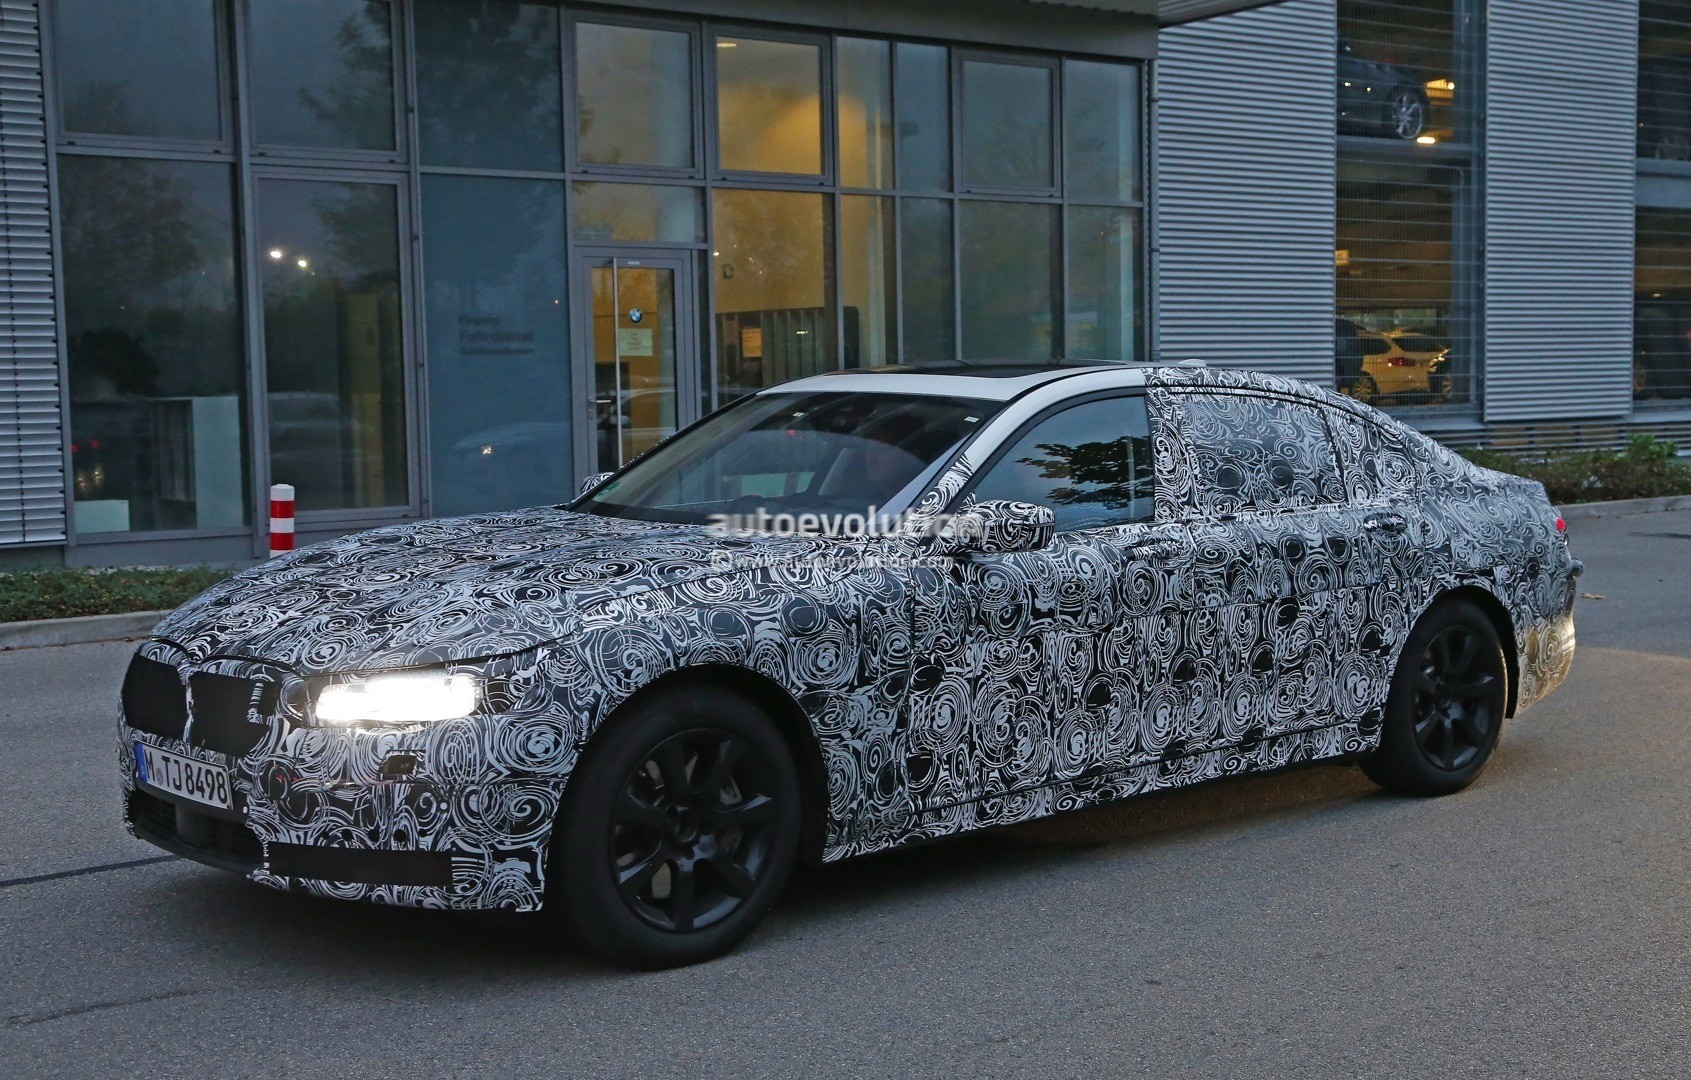 2015 - [BMW] Série 7 / 7 LWB [G11/G12] - Page 15 2016-bmw-7-series-interior-spied-the-new-idrive-interface-revealed-photo-gallery_5